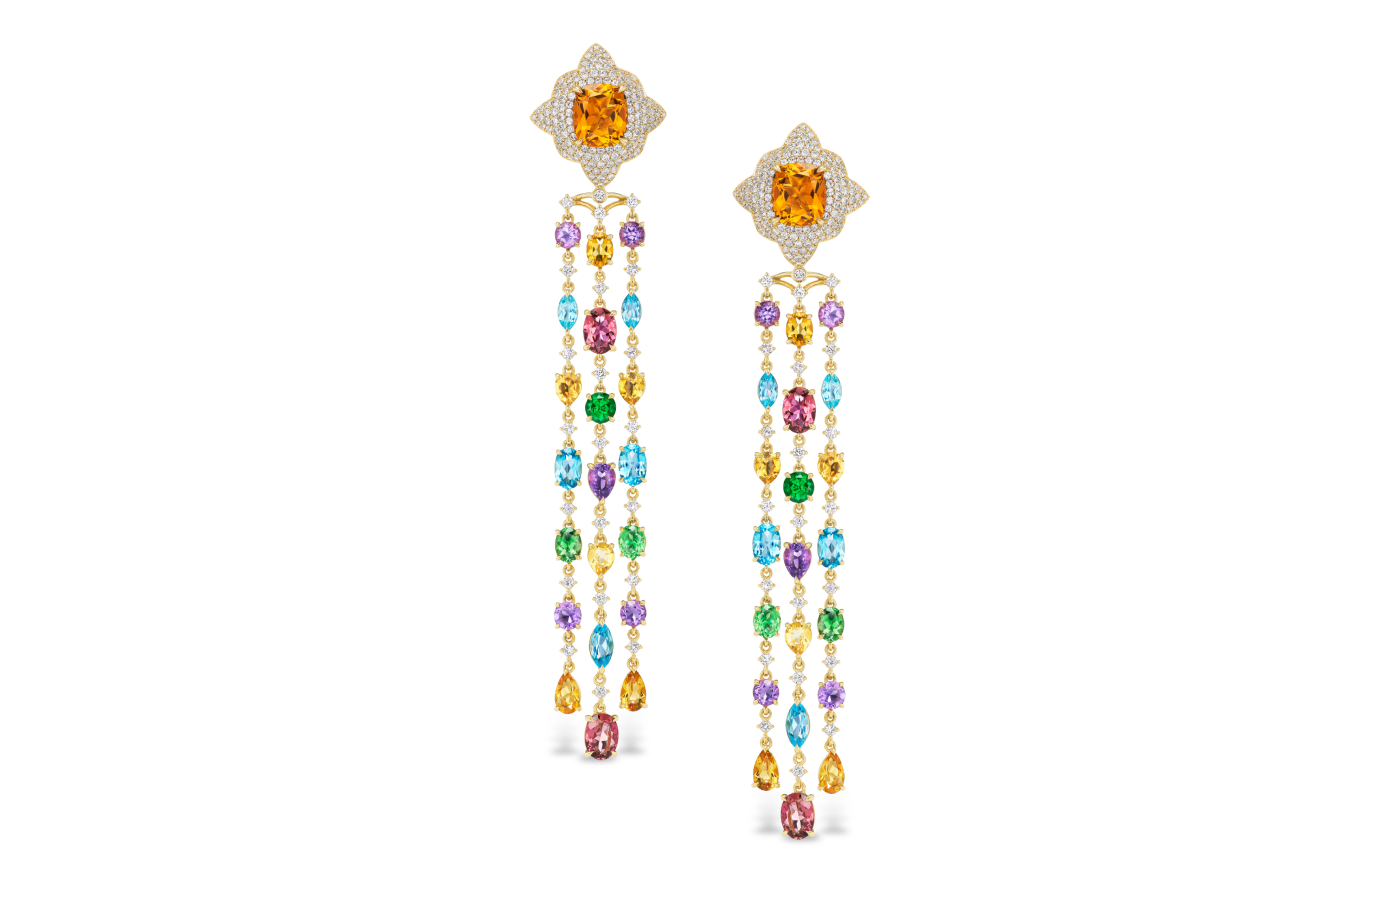 ZARIG Aurelia Cascade earrings with 3.09 carats of diamonds and 22.56 carats of amethyst, pink tourmaline, tsavorite, citrine and blue topaz set in 18k yellow gold 